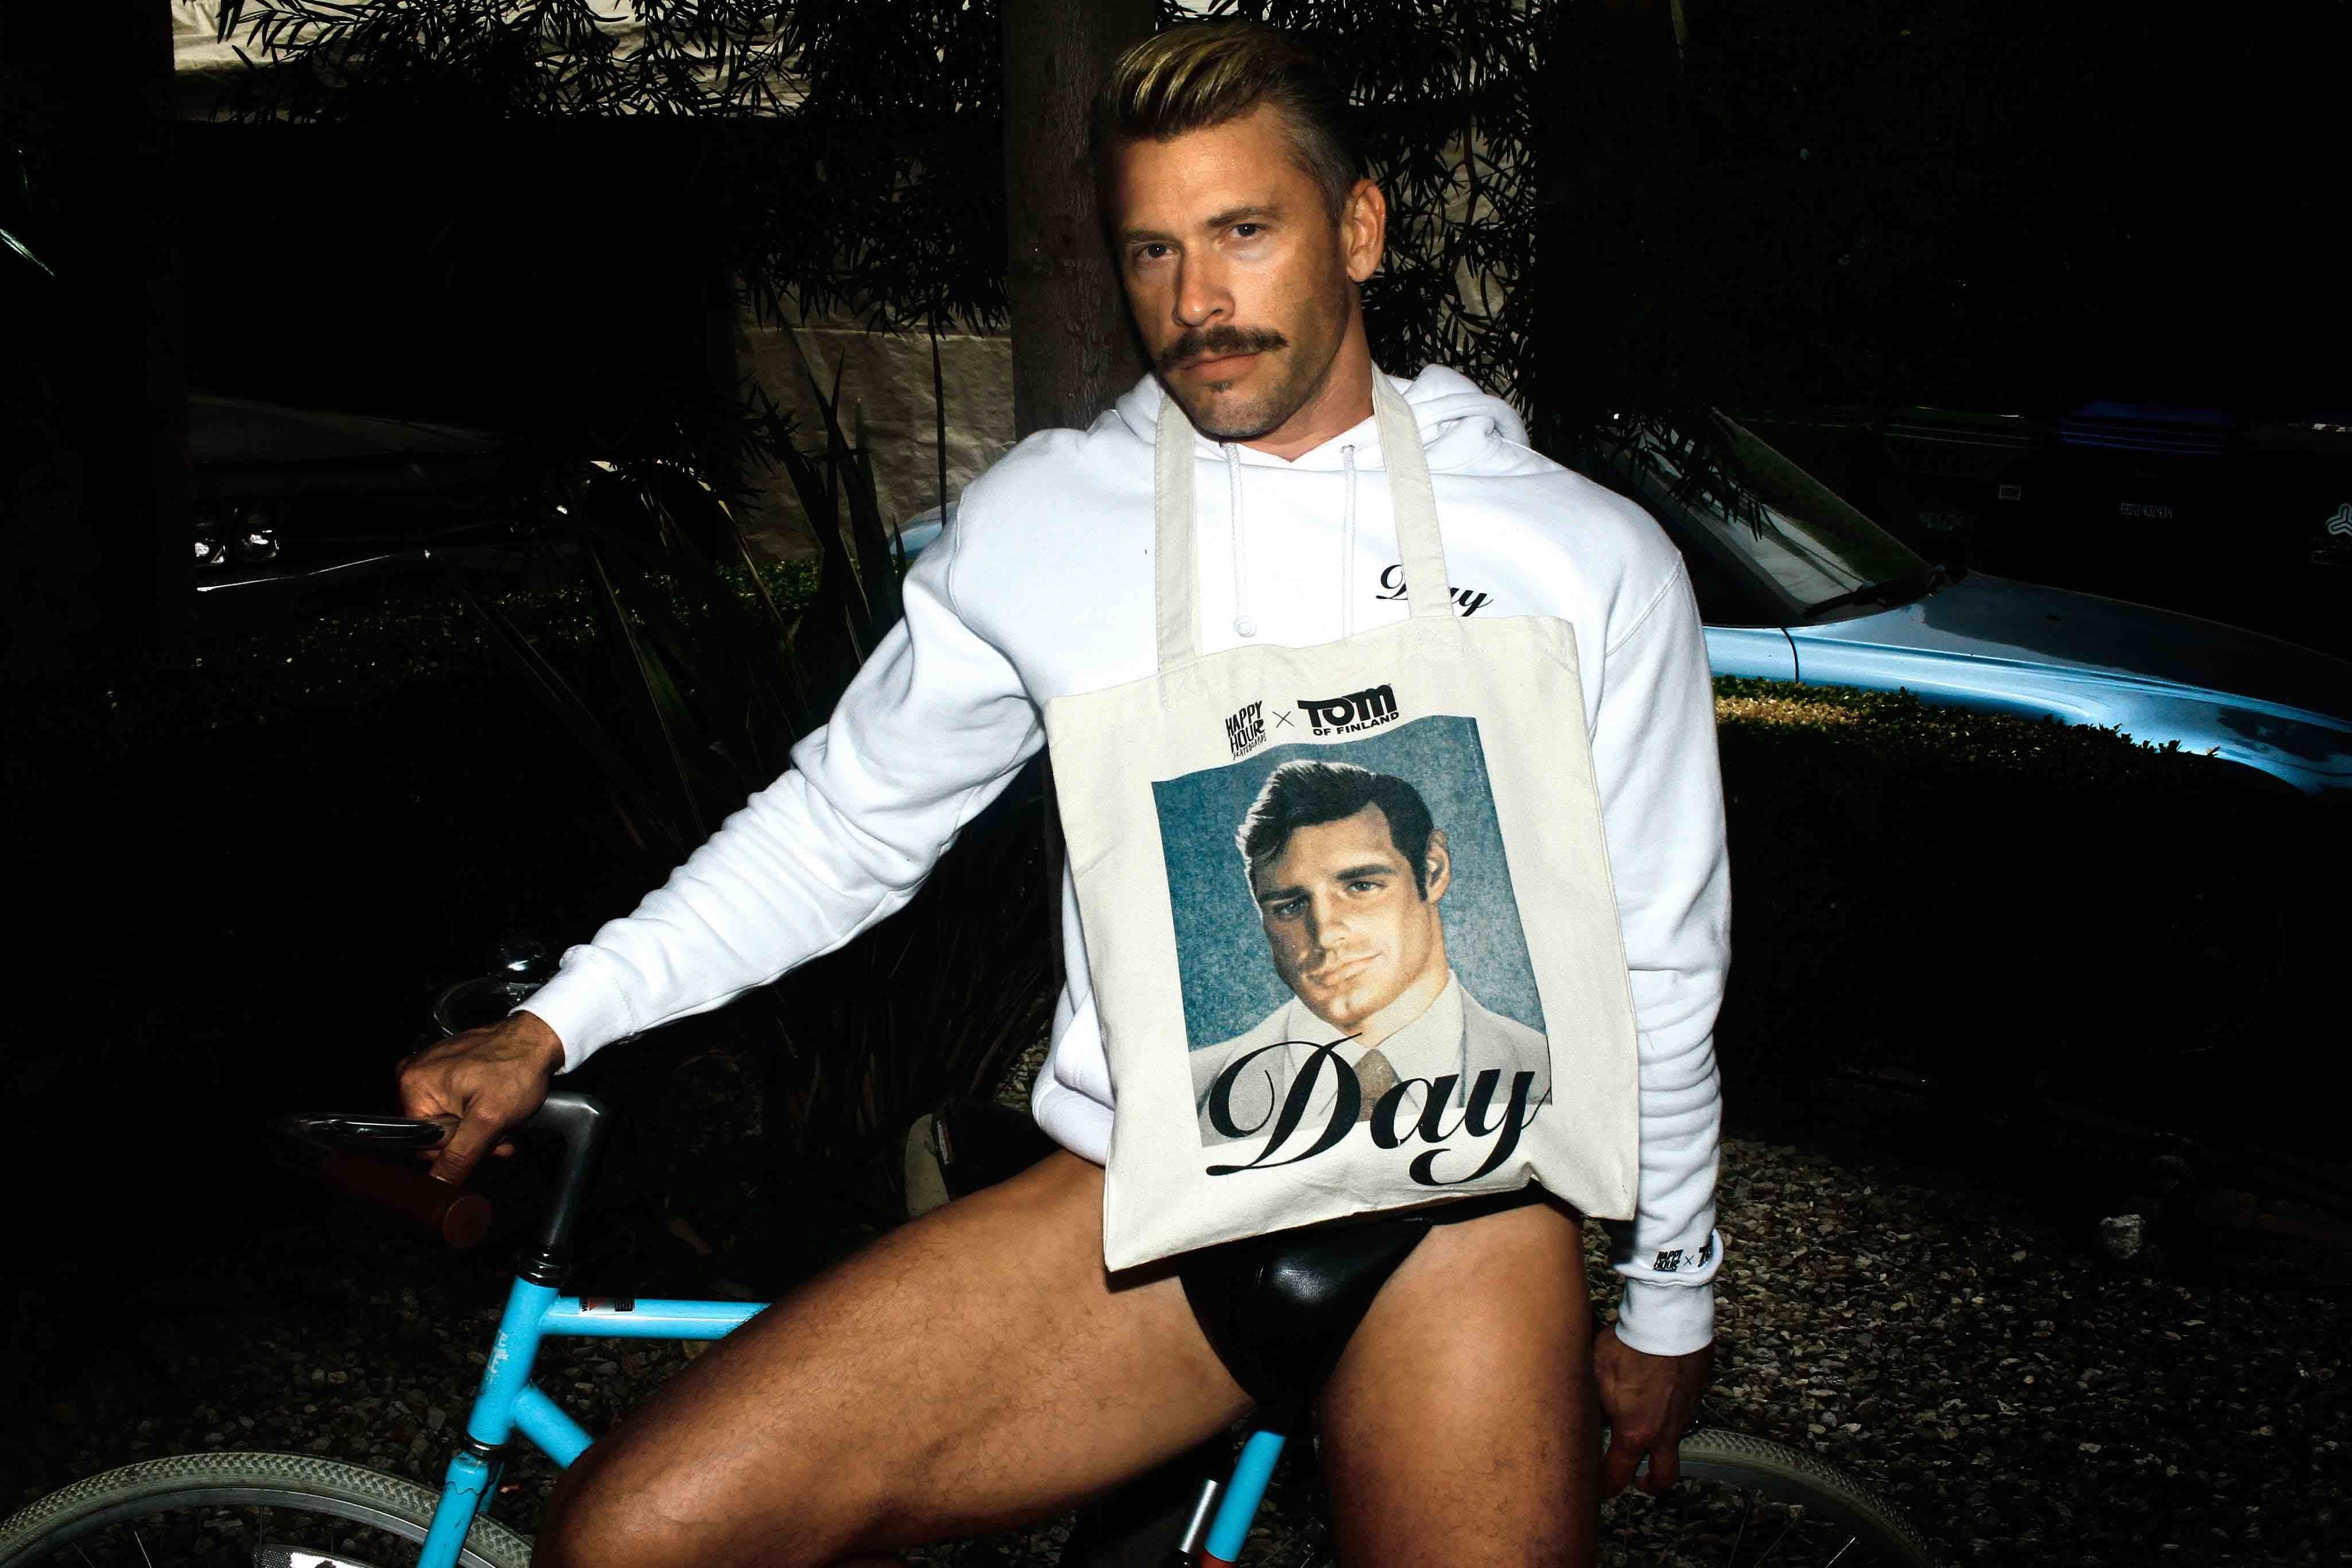 Muscle Daddy Terry Miller Stars in Tom of Finland's New Lookbook